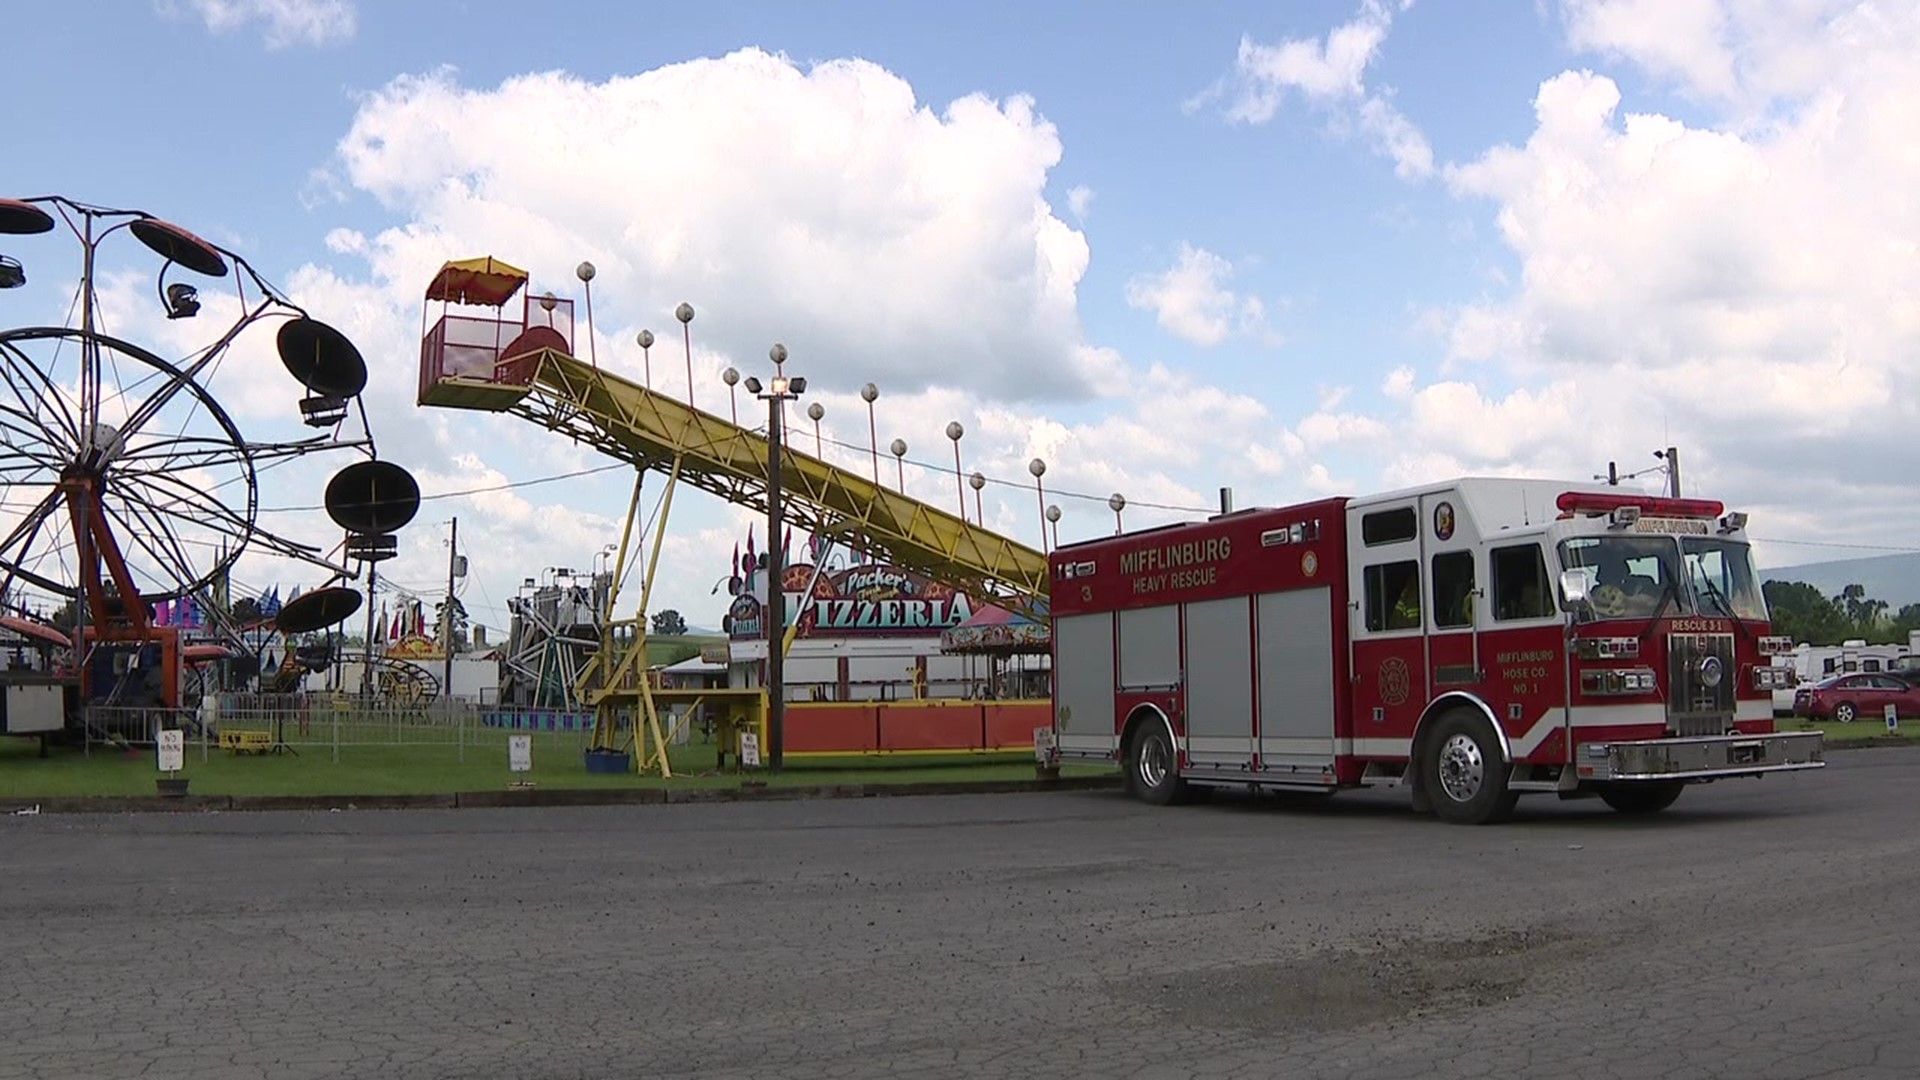 The Mifflinburg Hose Company Firemen’s Carnival has been a big highlight for residents of this small community since the 1950s.